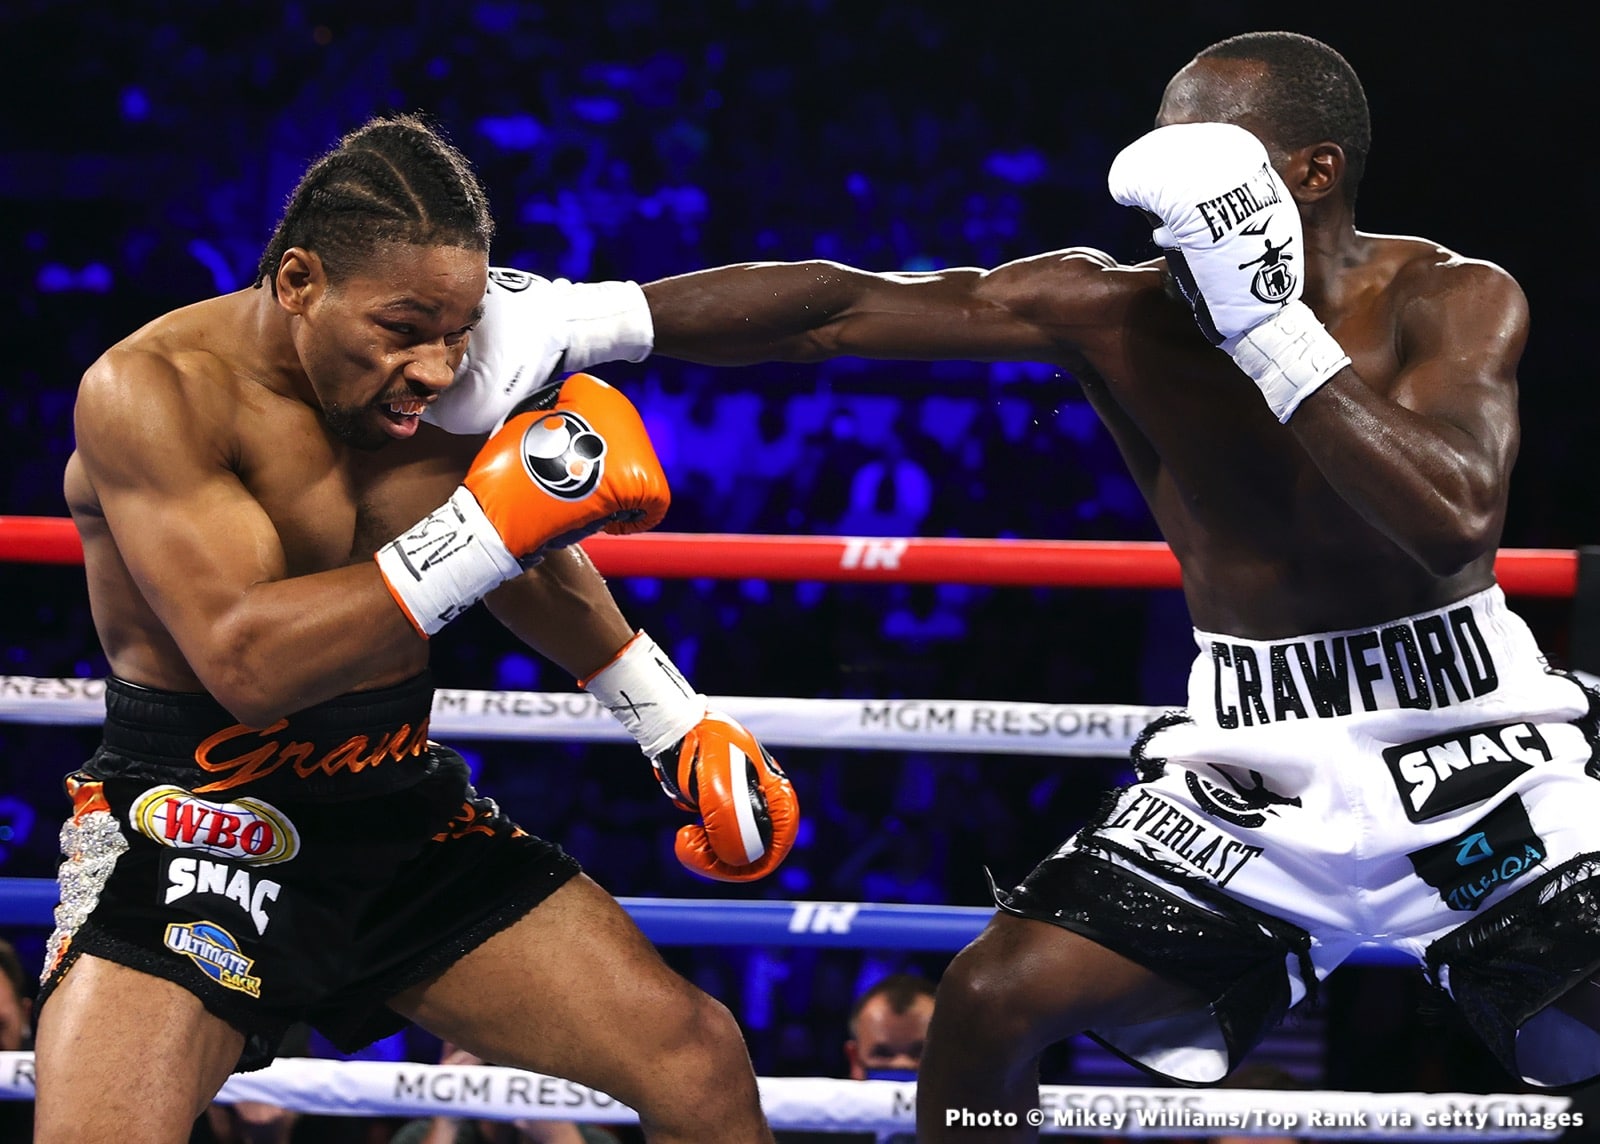 Keith Thurman, Mario Barrios, Shawn Porter, Terence Crawford boxing image / photo